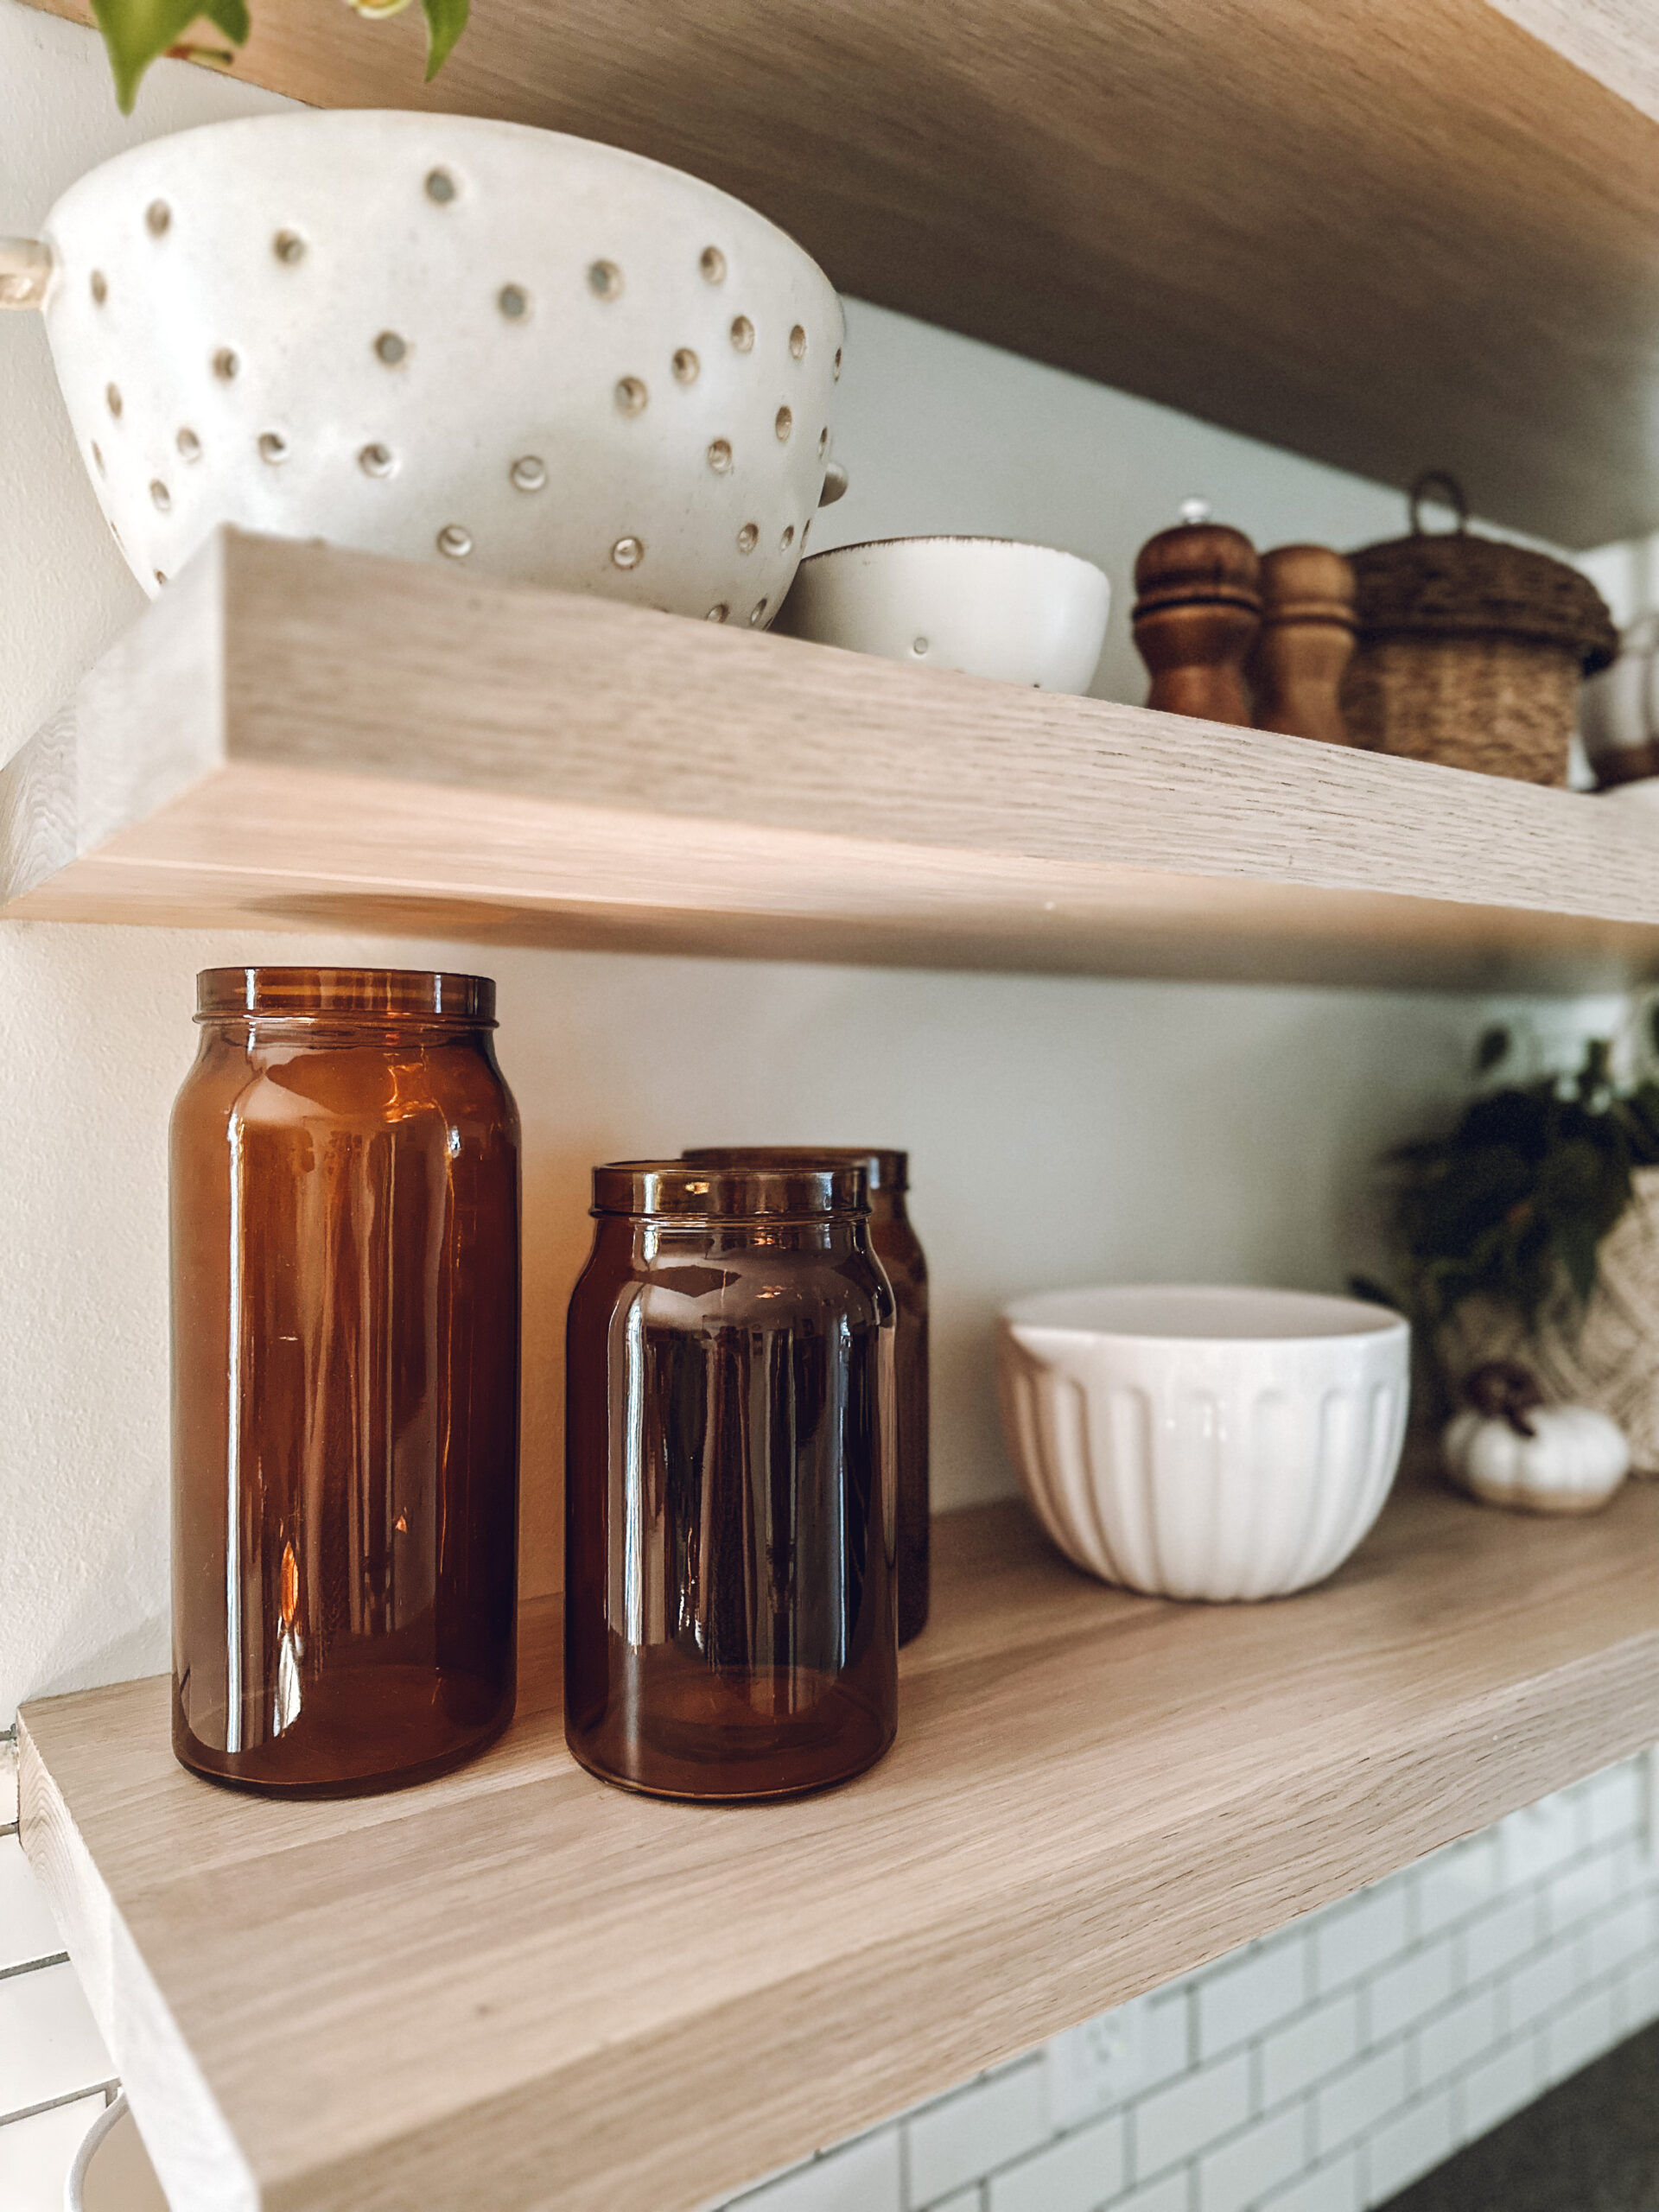 place amber glass jars on the kitchen shelf for fall